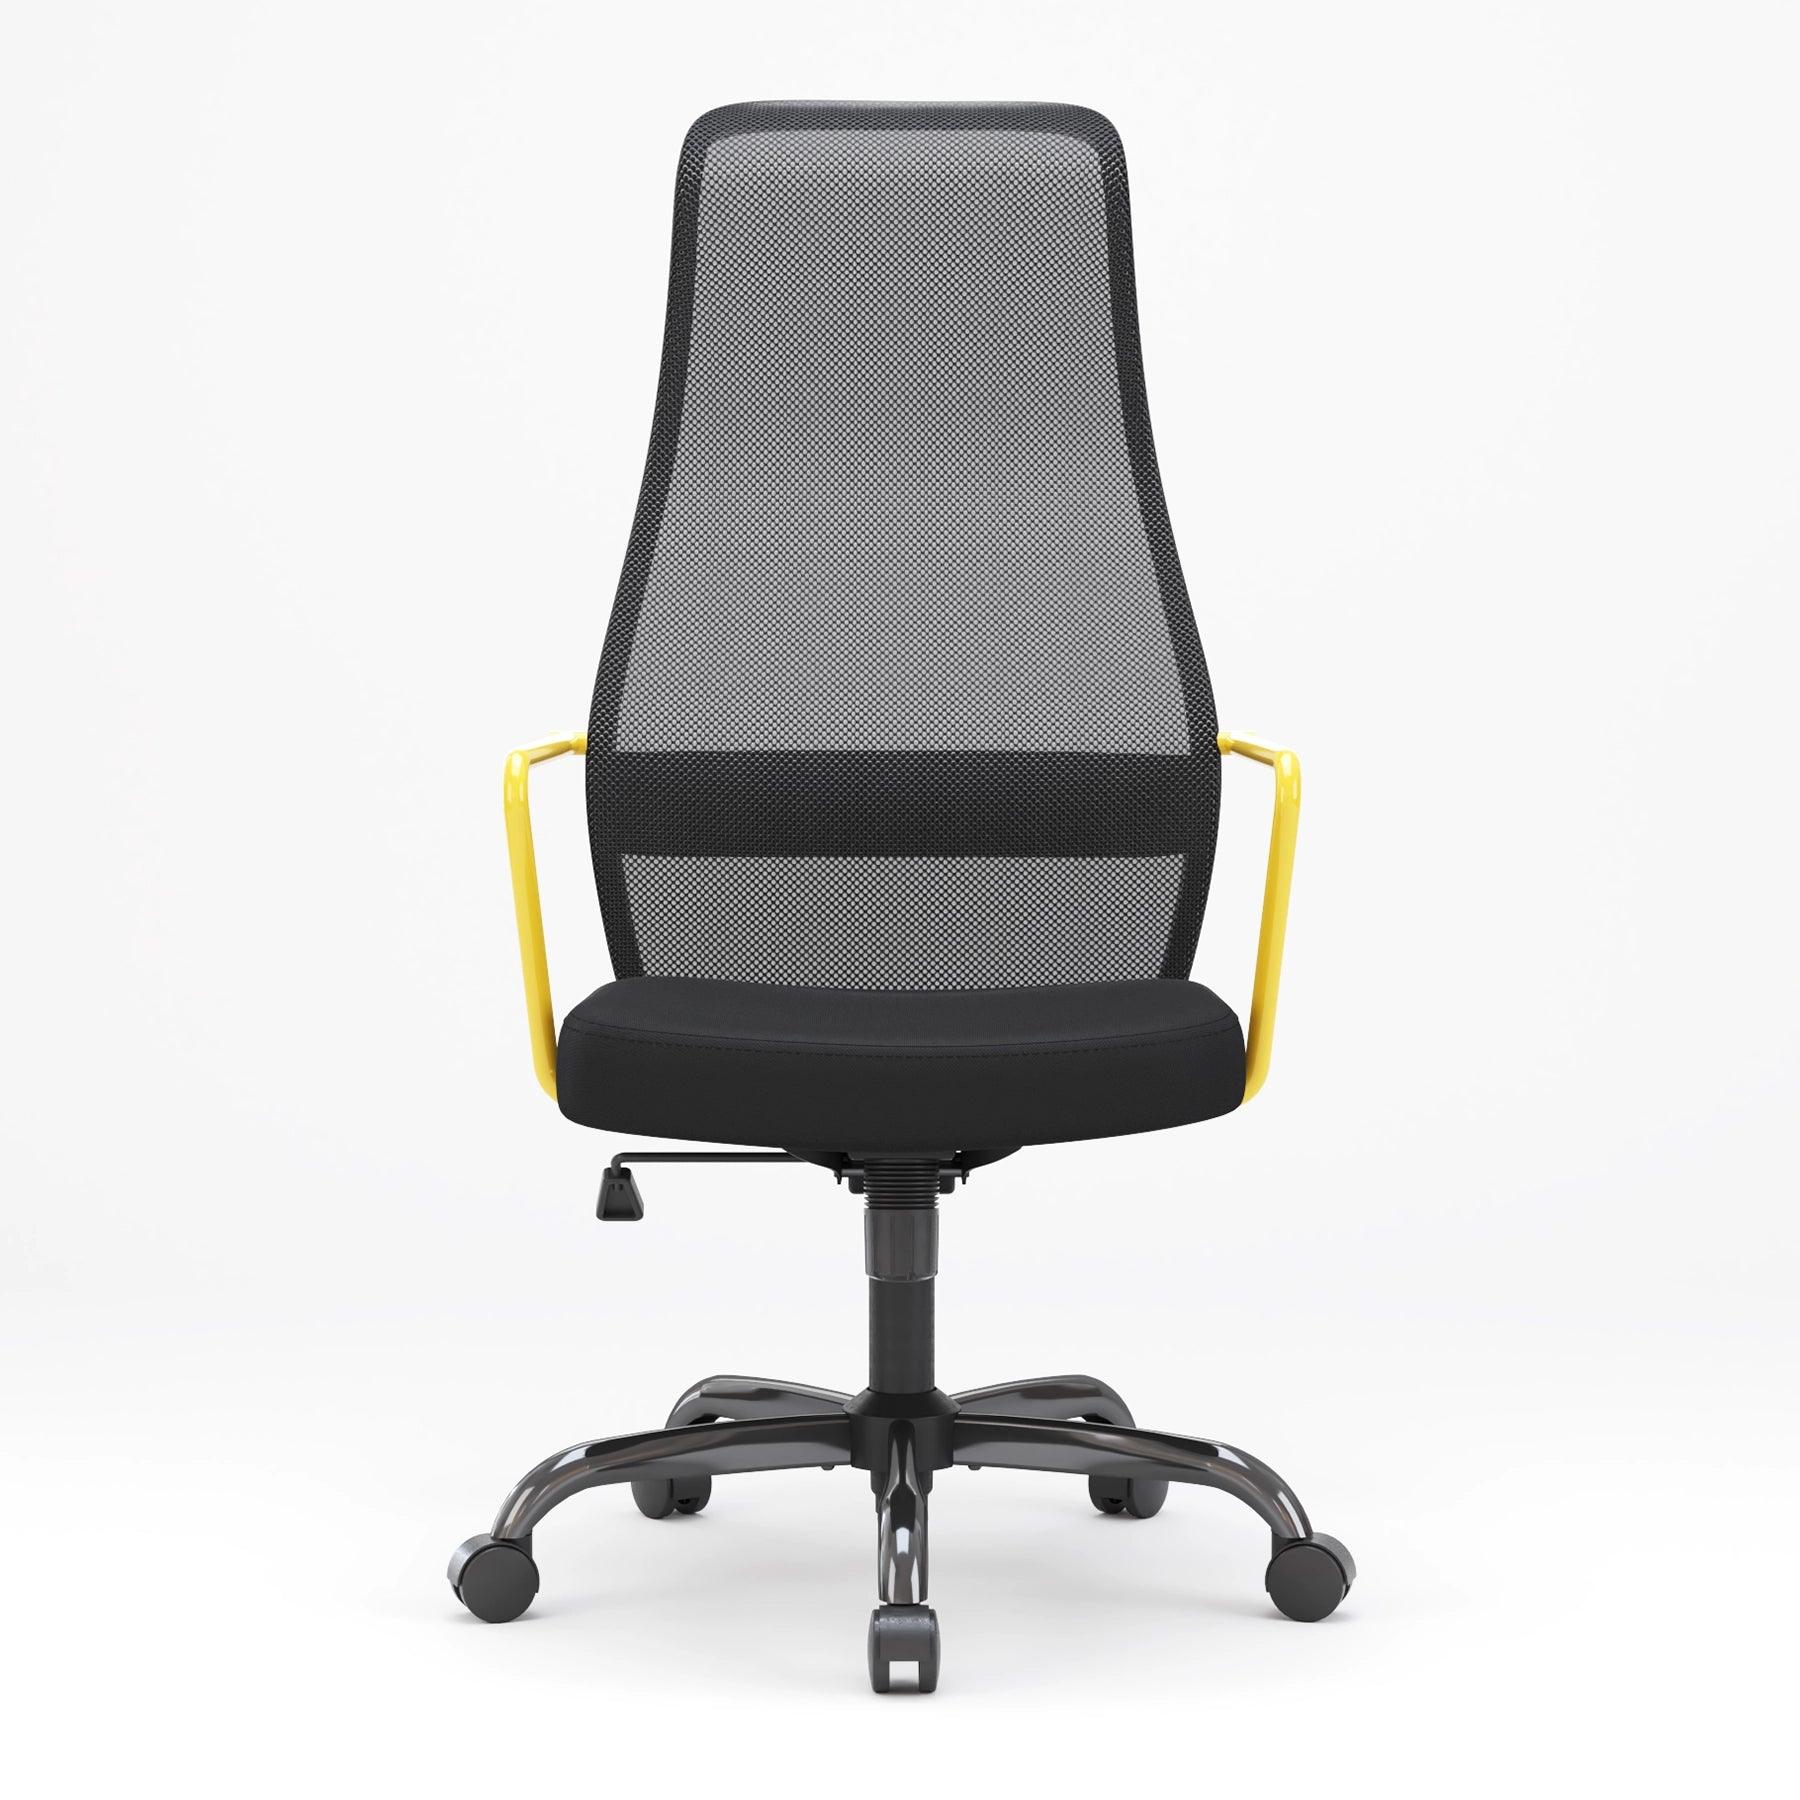 Official Online Store for Sihoo Ergonomic Chairs